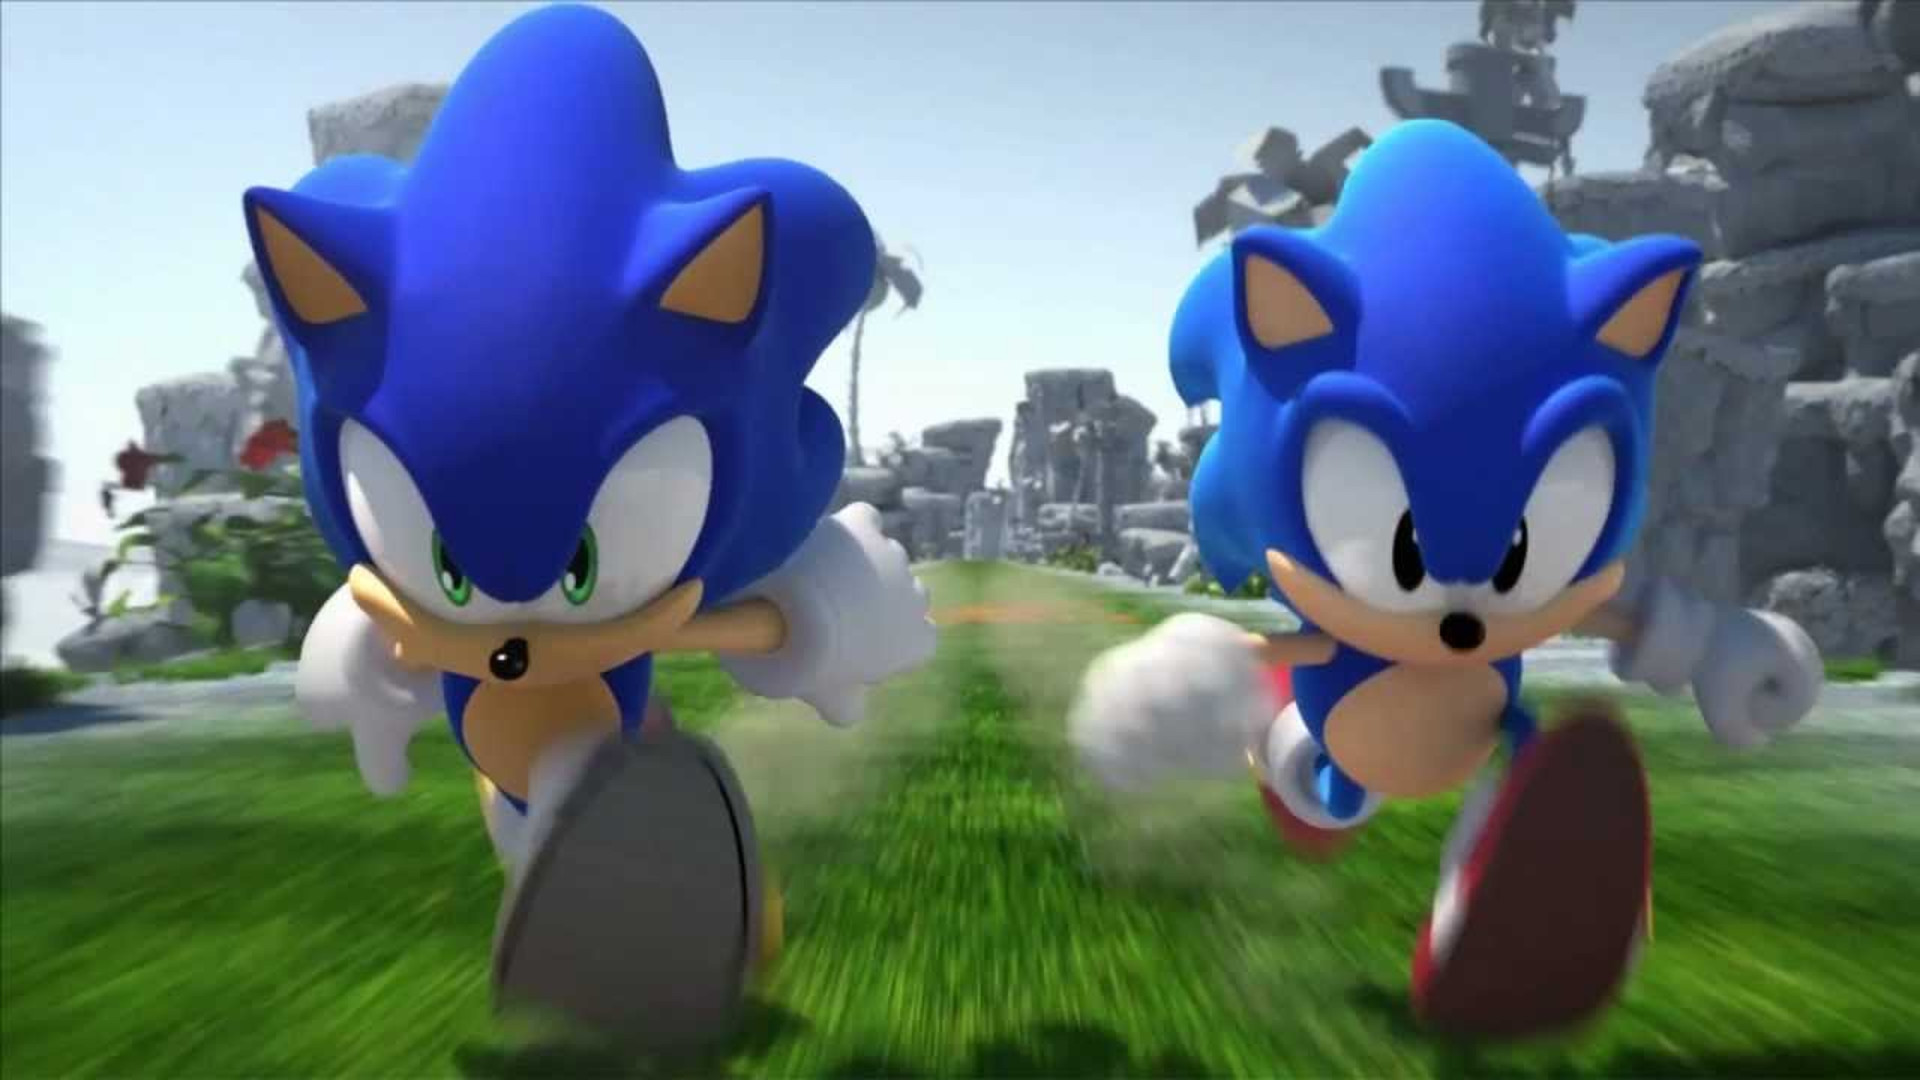 Journey Through Generations of Sonic the Hedgehog Games with the